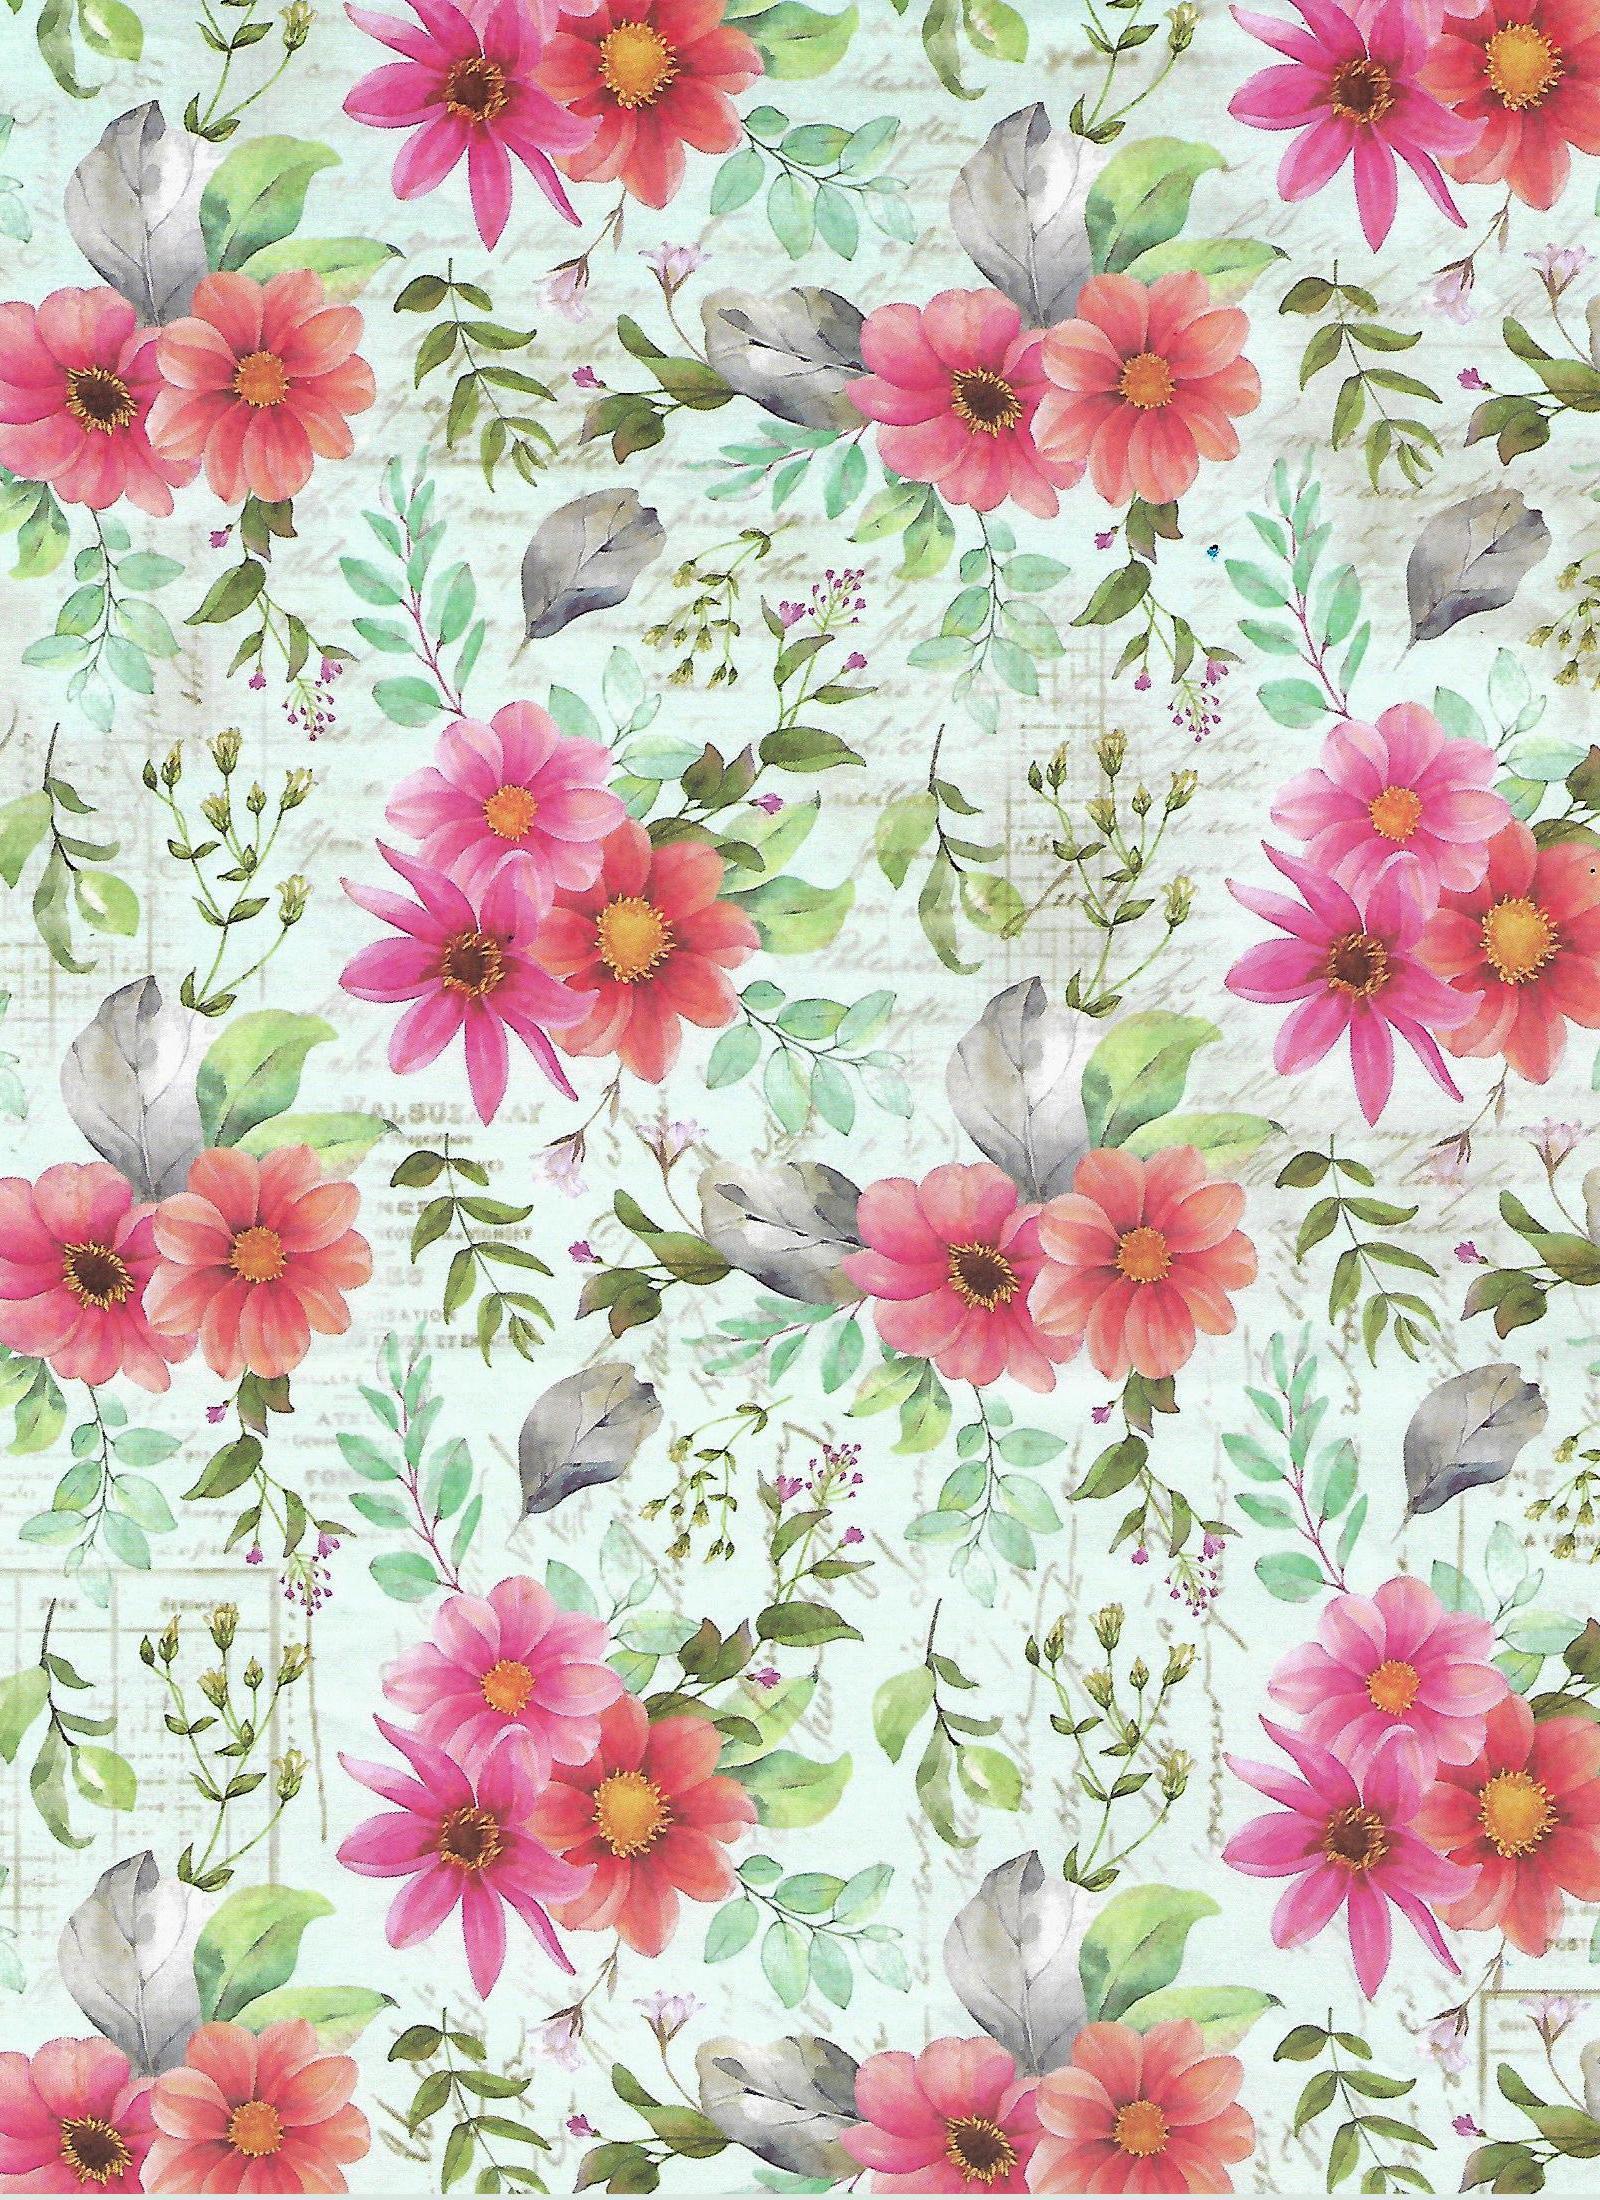 Decoupage Paper - Pink Flowers in green base - Size A4 - 2 sheets